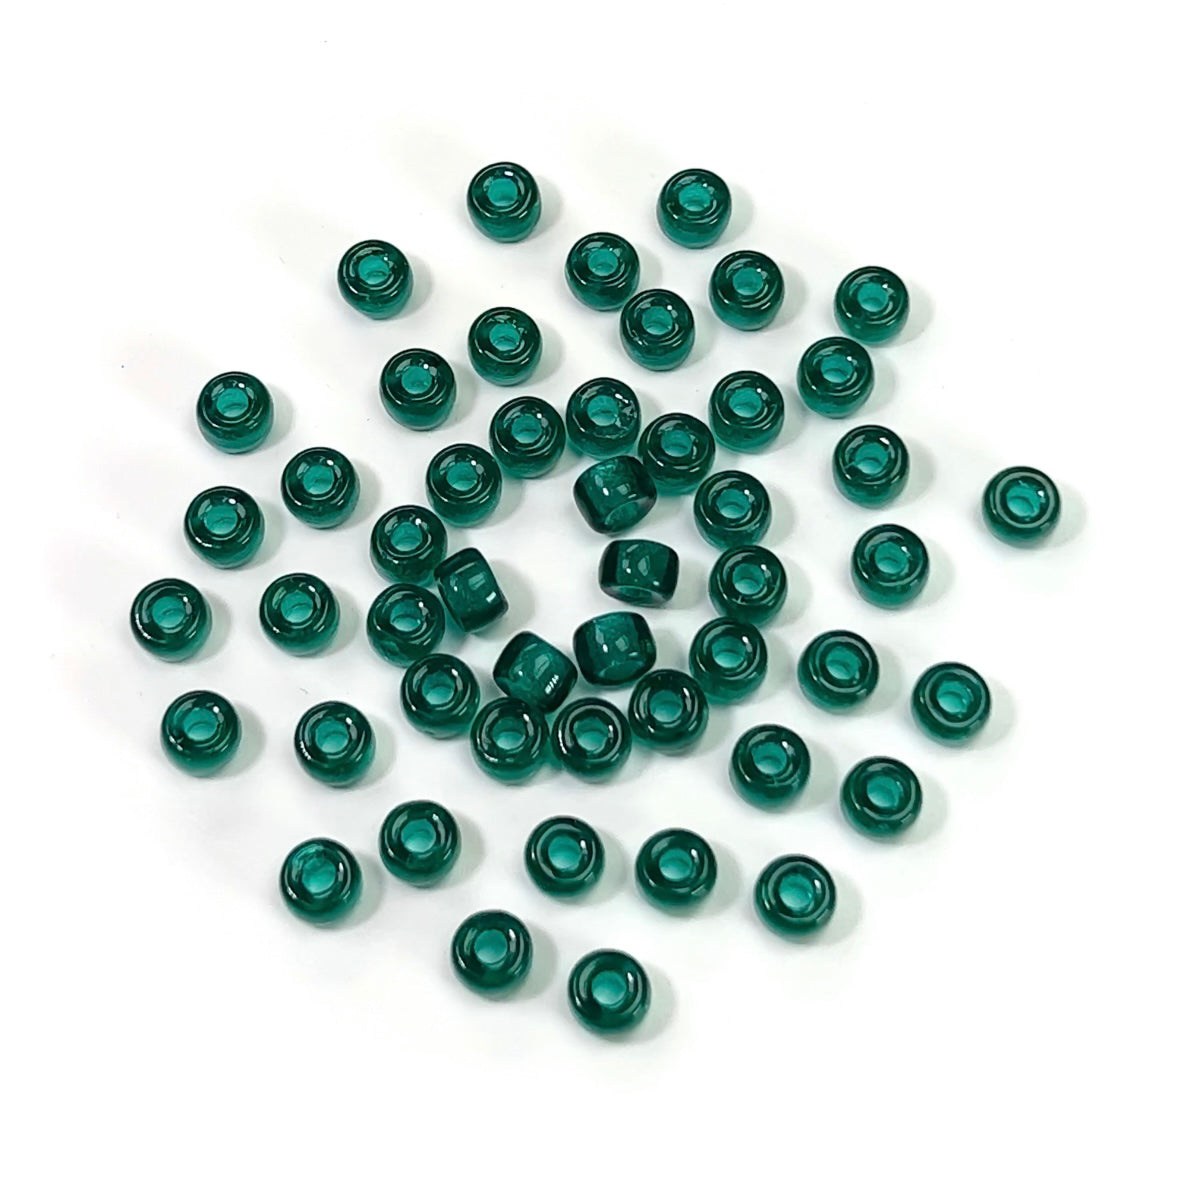 Czech Glass Druk Large Hole Beads in size 6mm, Emerald green color, 50pcs, J096